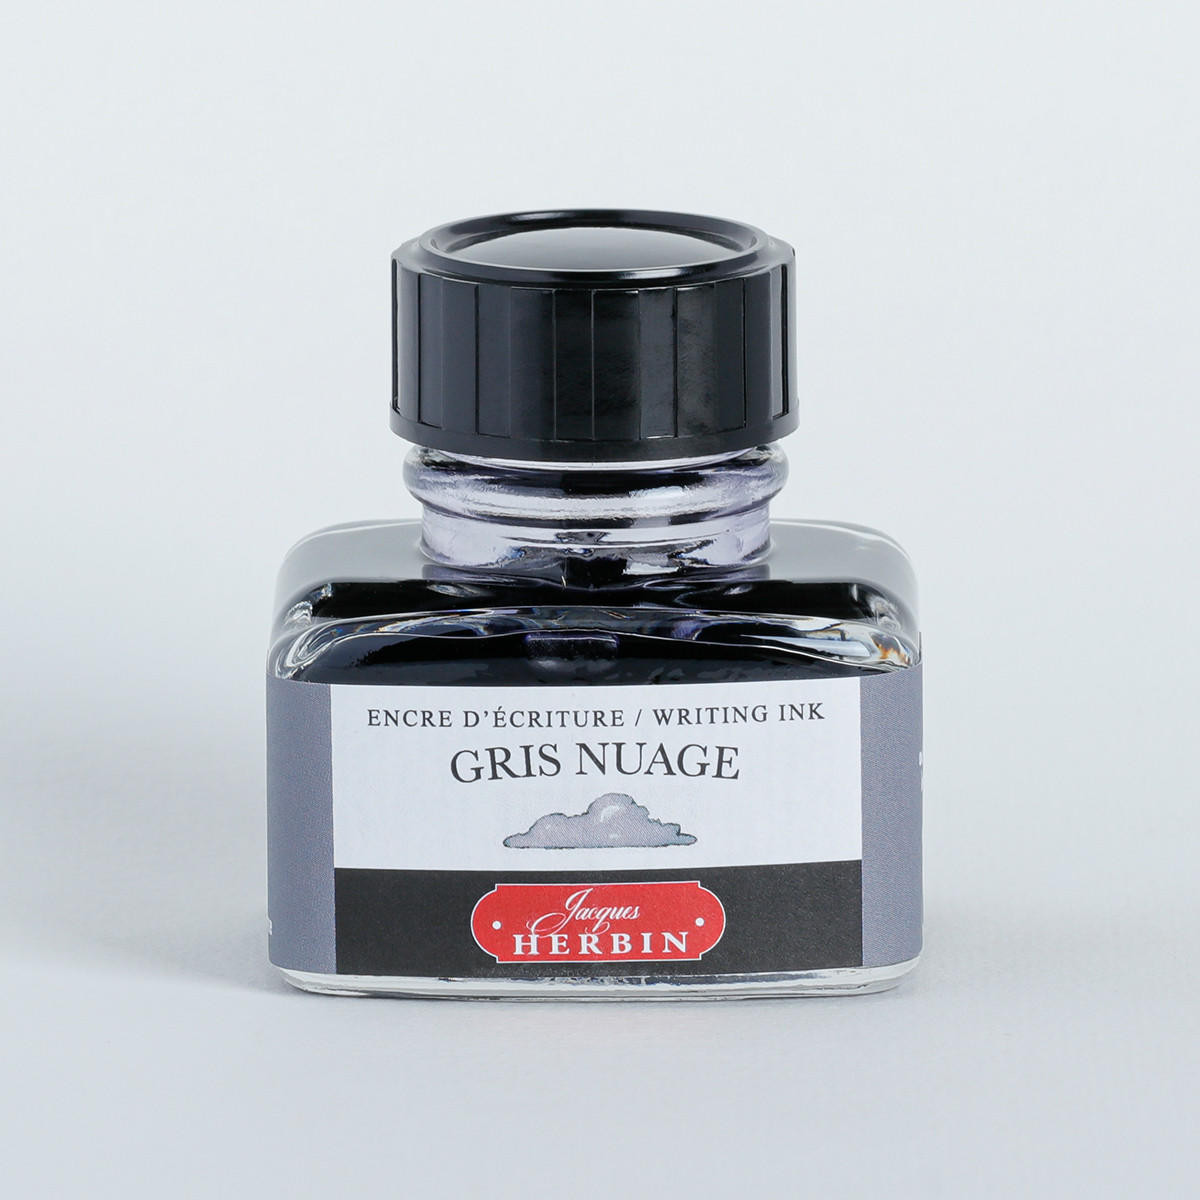 Herbin ’D’ Writing and Drawing Ink 30ml Gris nuage